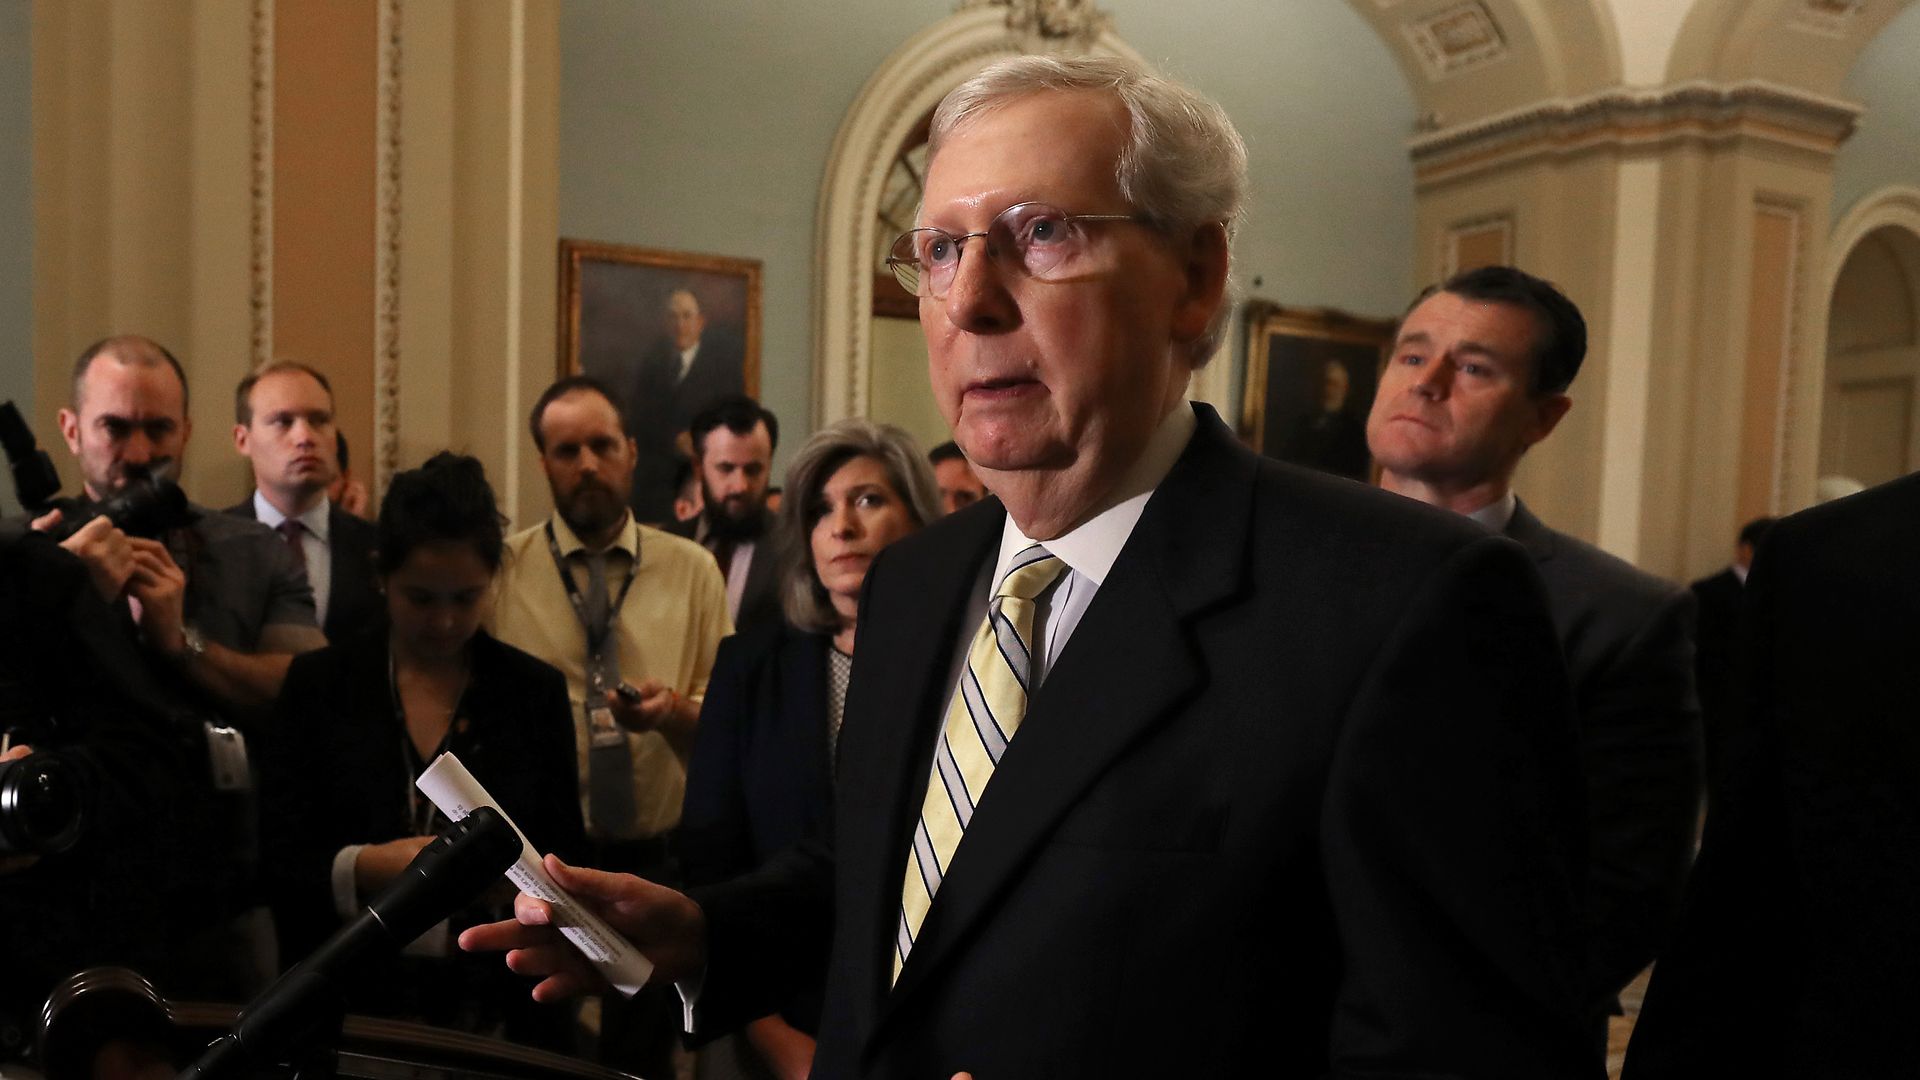 Senate Majority Leader Mitch McConnell (R-KY) speaks to the media after attending the Republican weekly policy luncheon on Capitol Hill, September 17